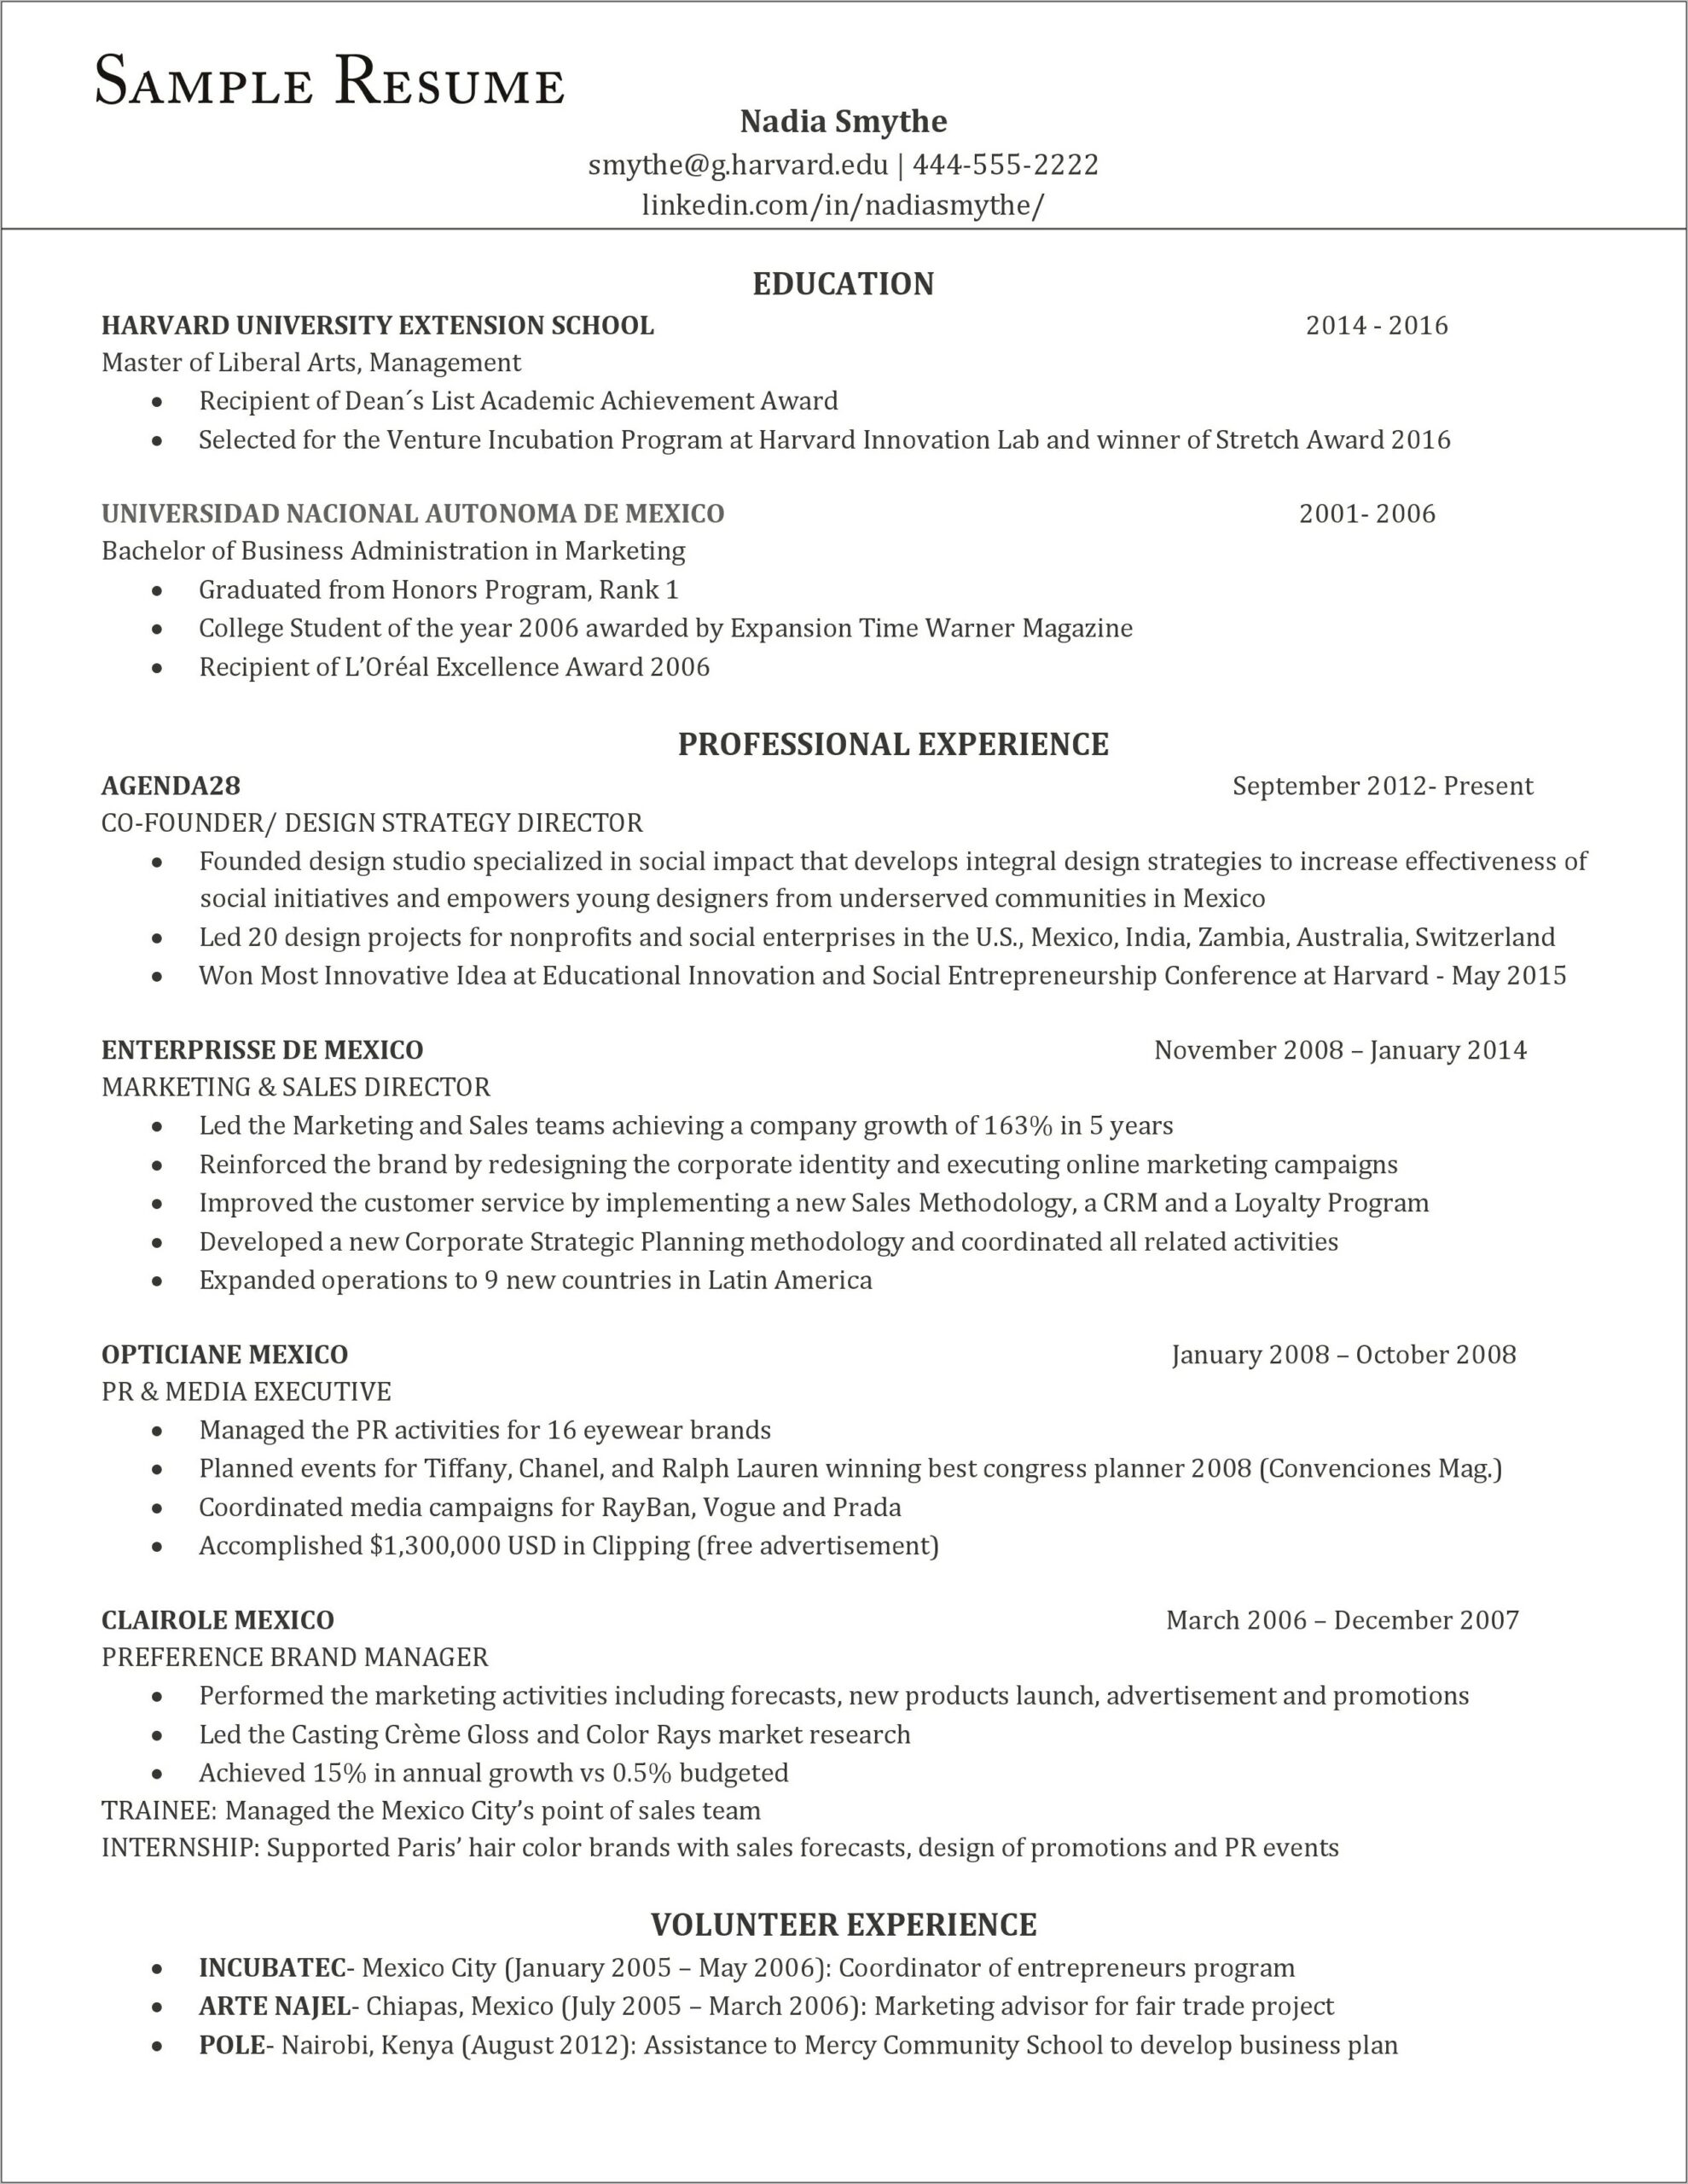 Sample Resume Templates For On Campus Jobs